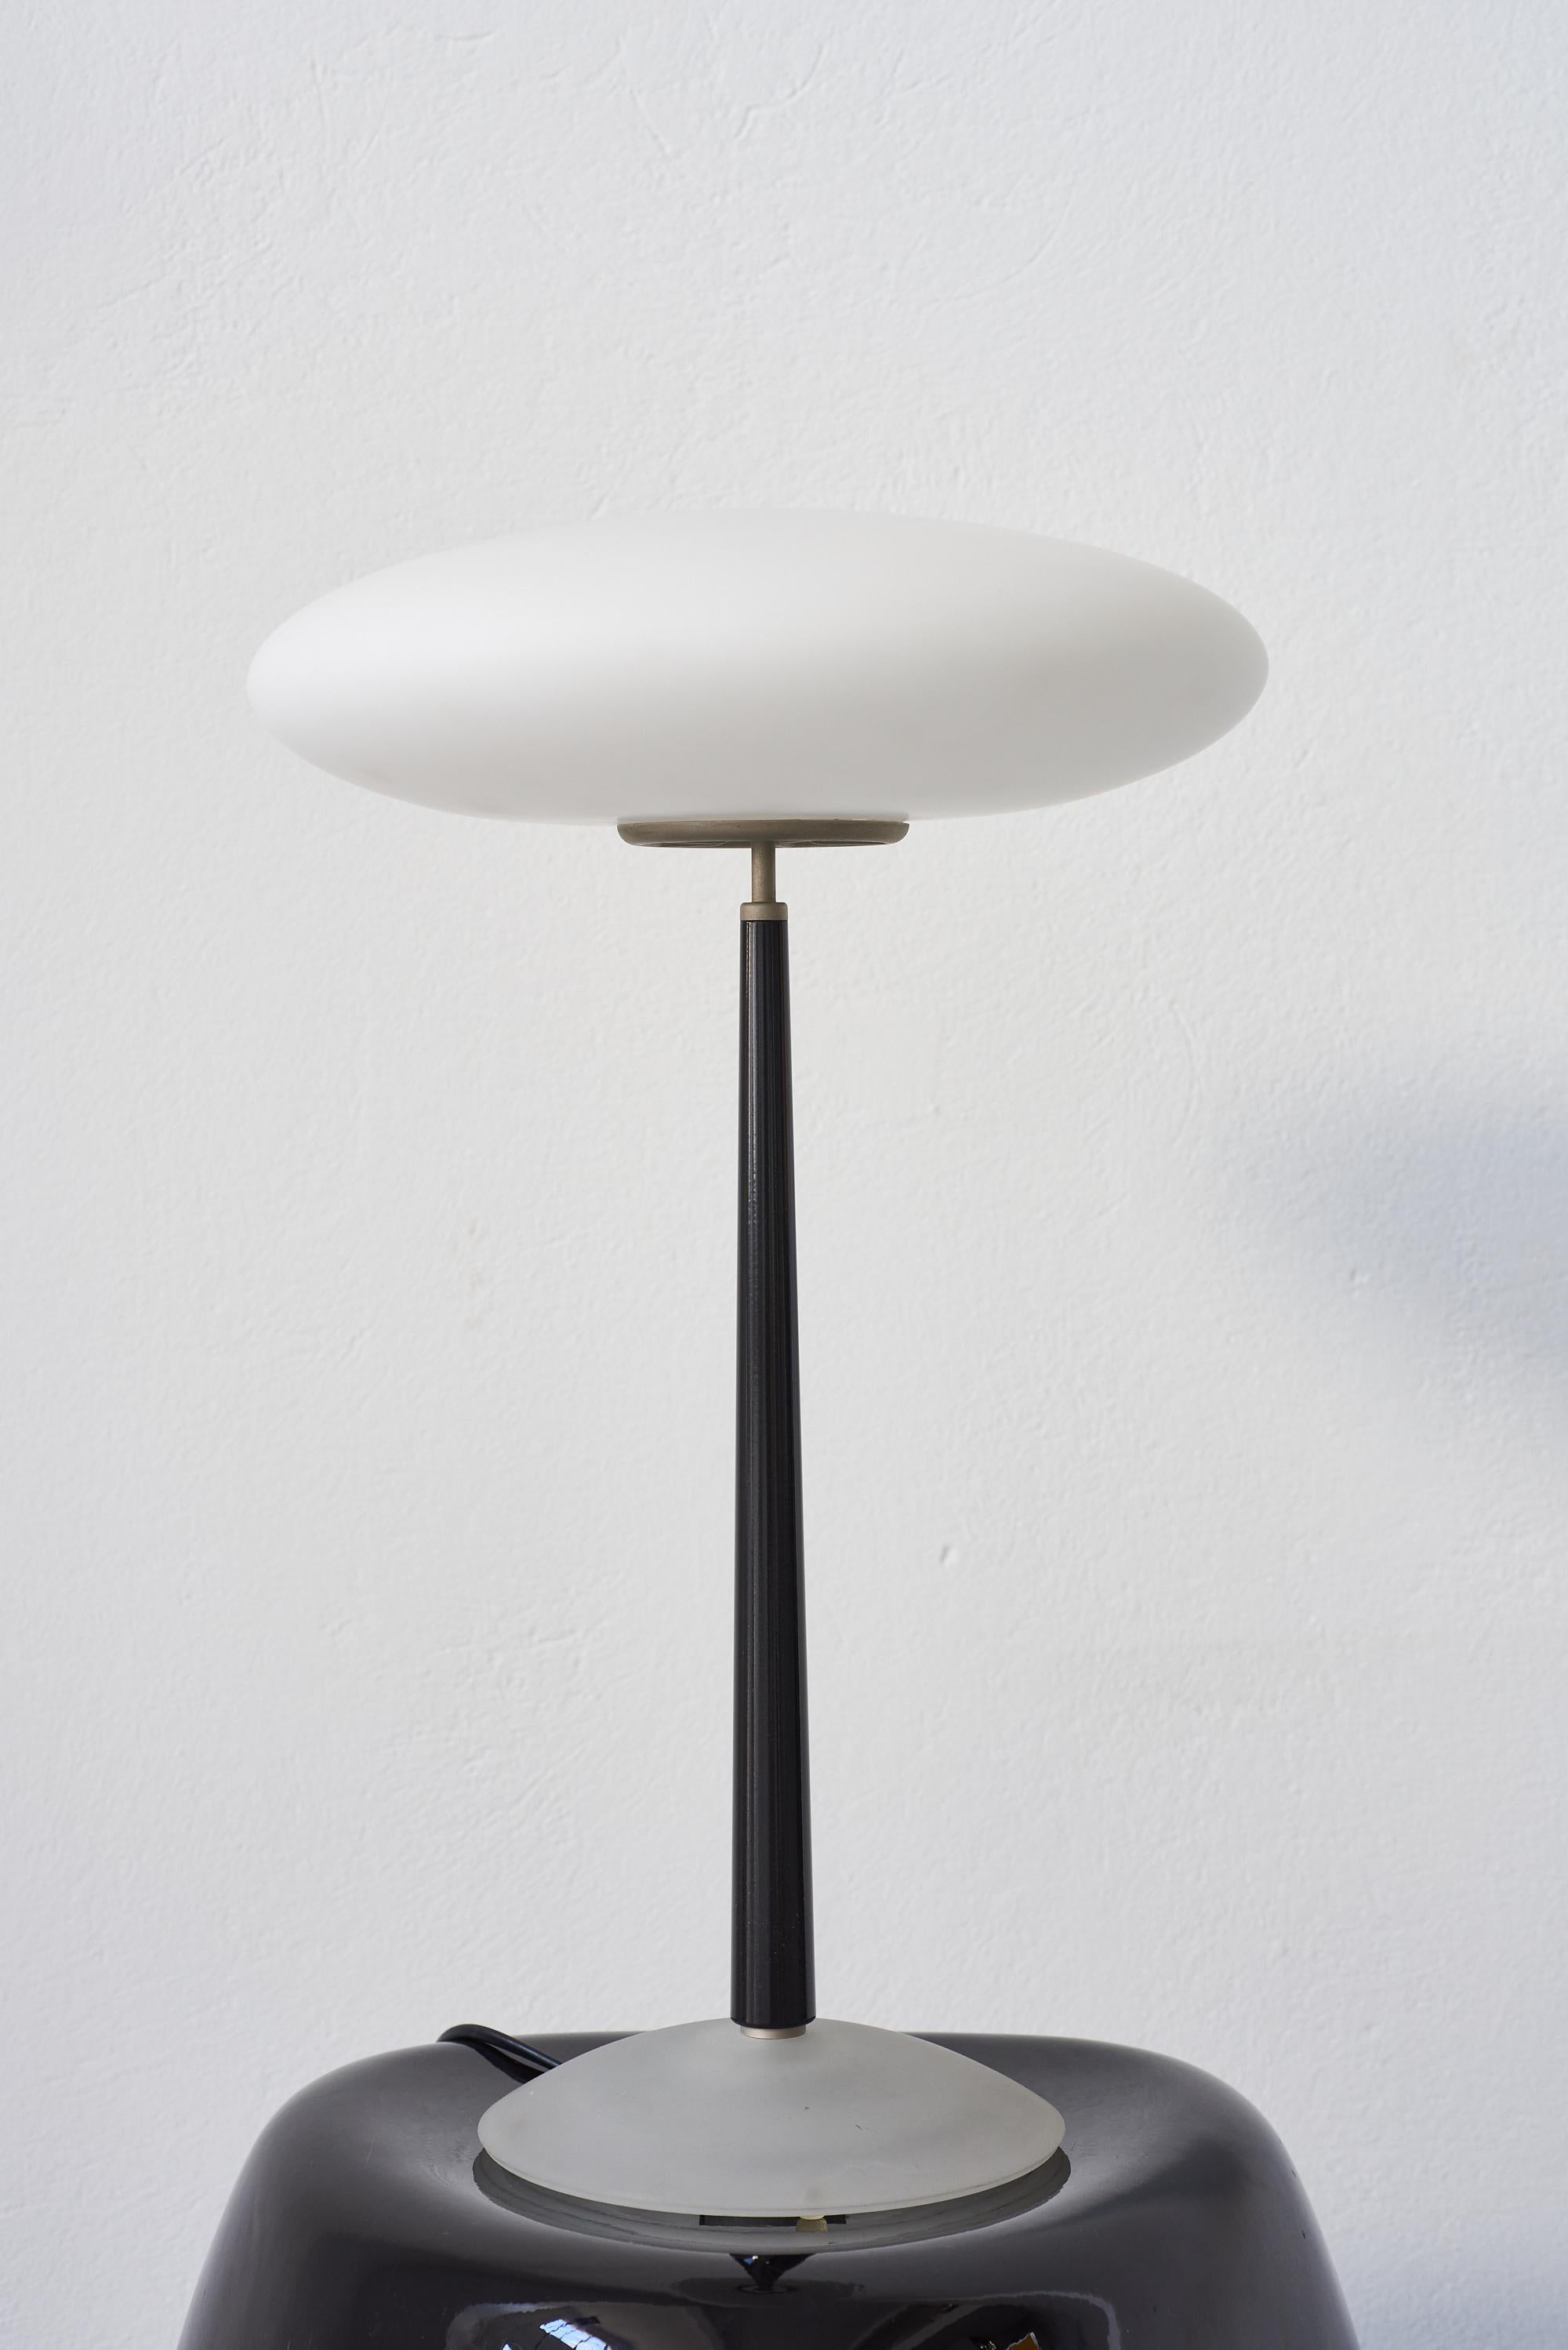 Pao table light by Matteo Thun for Arteluce, 1993.
Matteo Thun’s work is driven by the search for sophistication and subtle irony, which makes him something of a design dandy.When it comes to lighting, his solutions often reveal genuine technical or